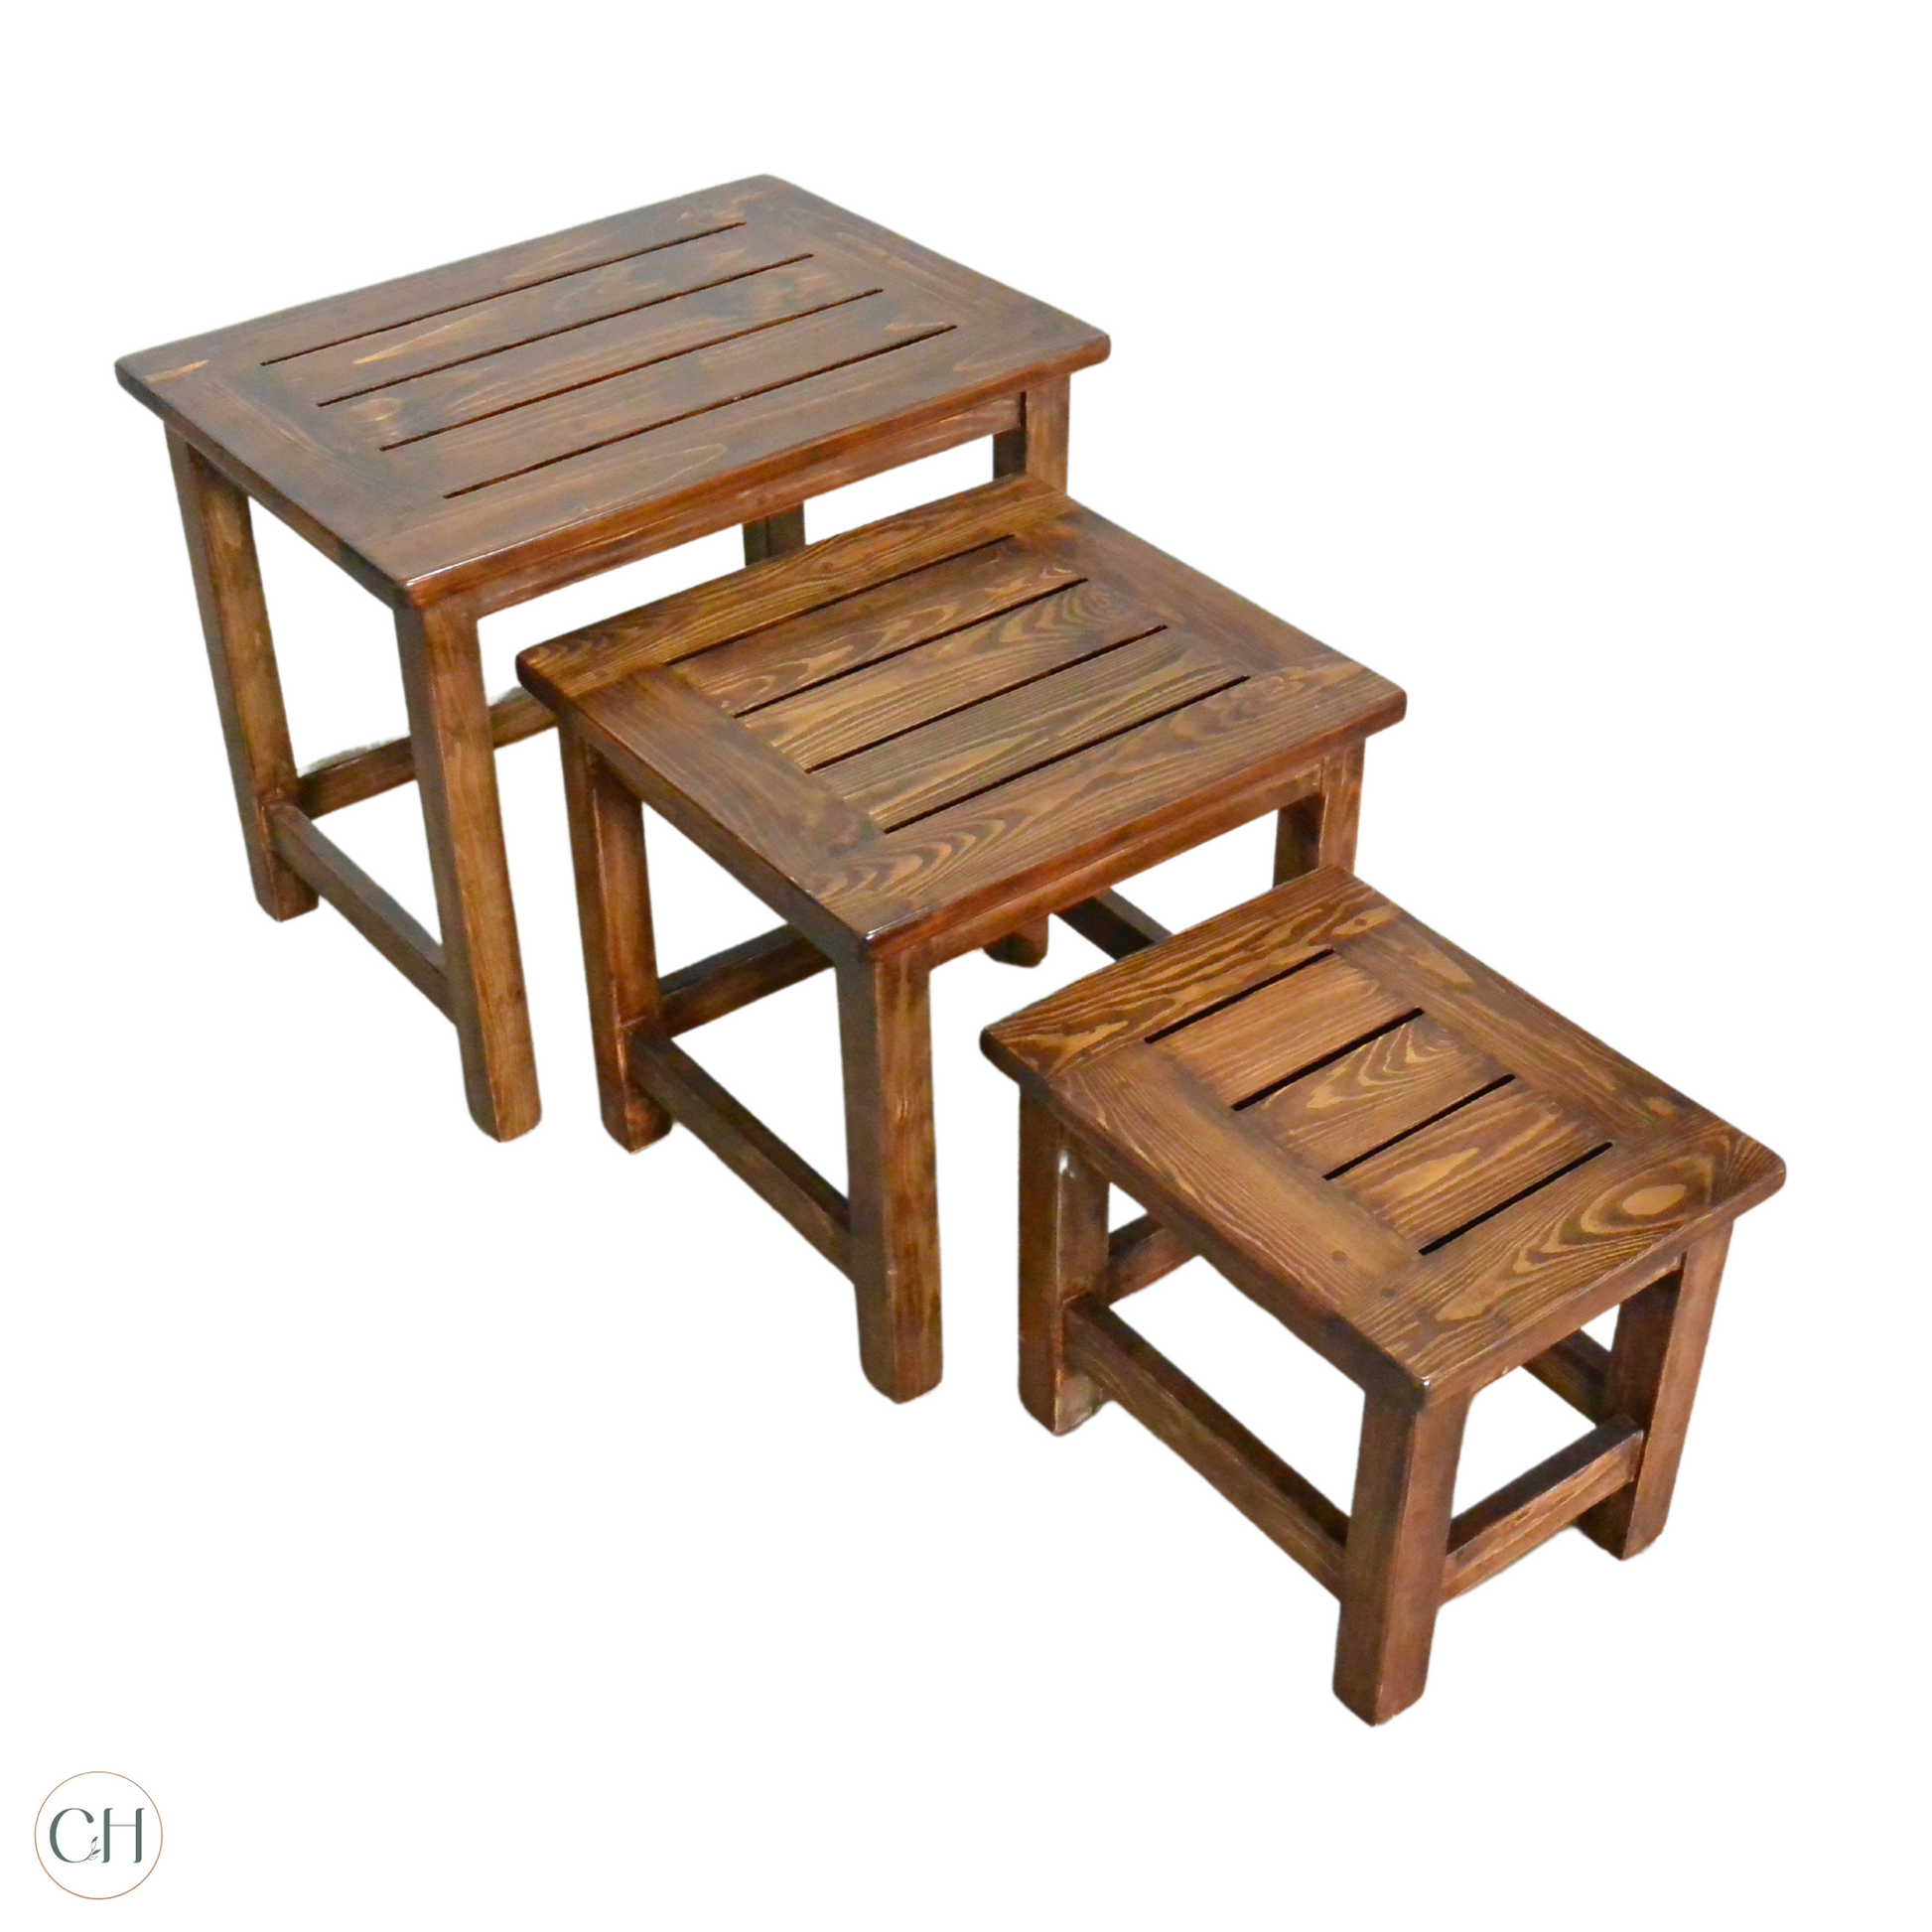 Skye - Set of 3 Solid Wood Nested Tables - CustHum